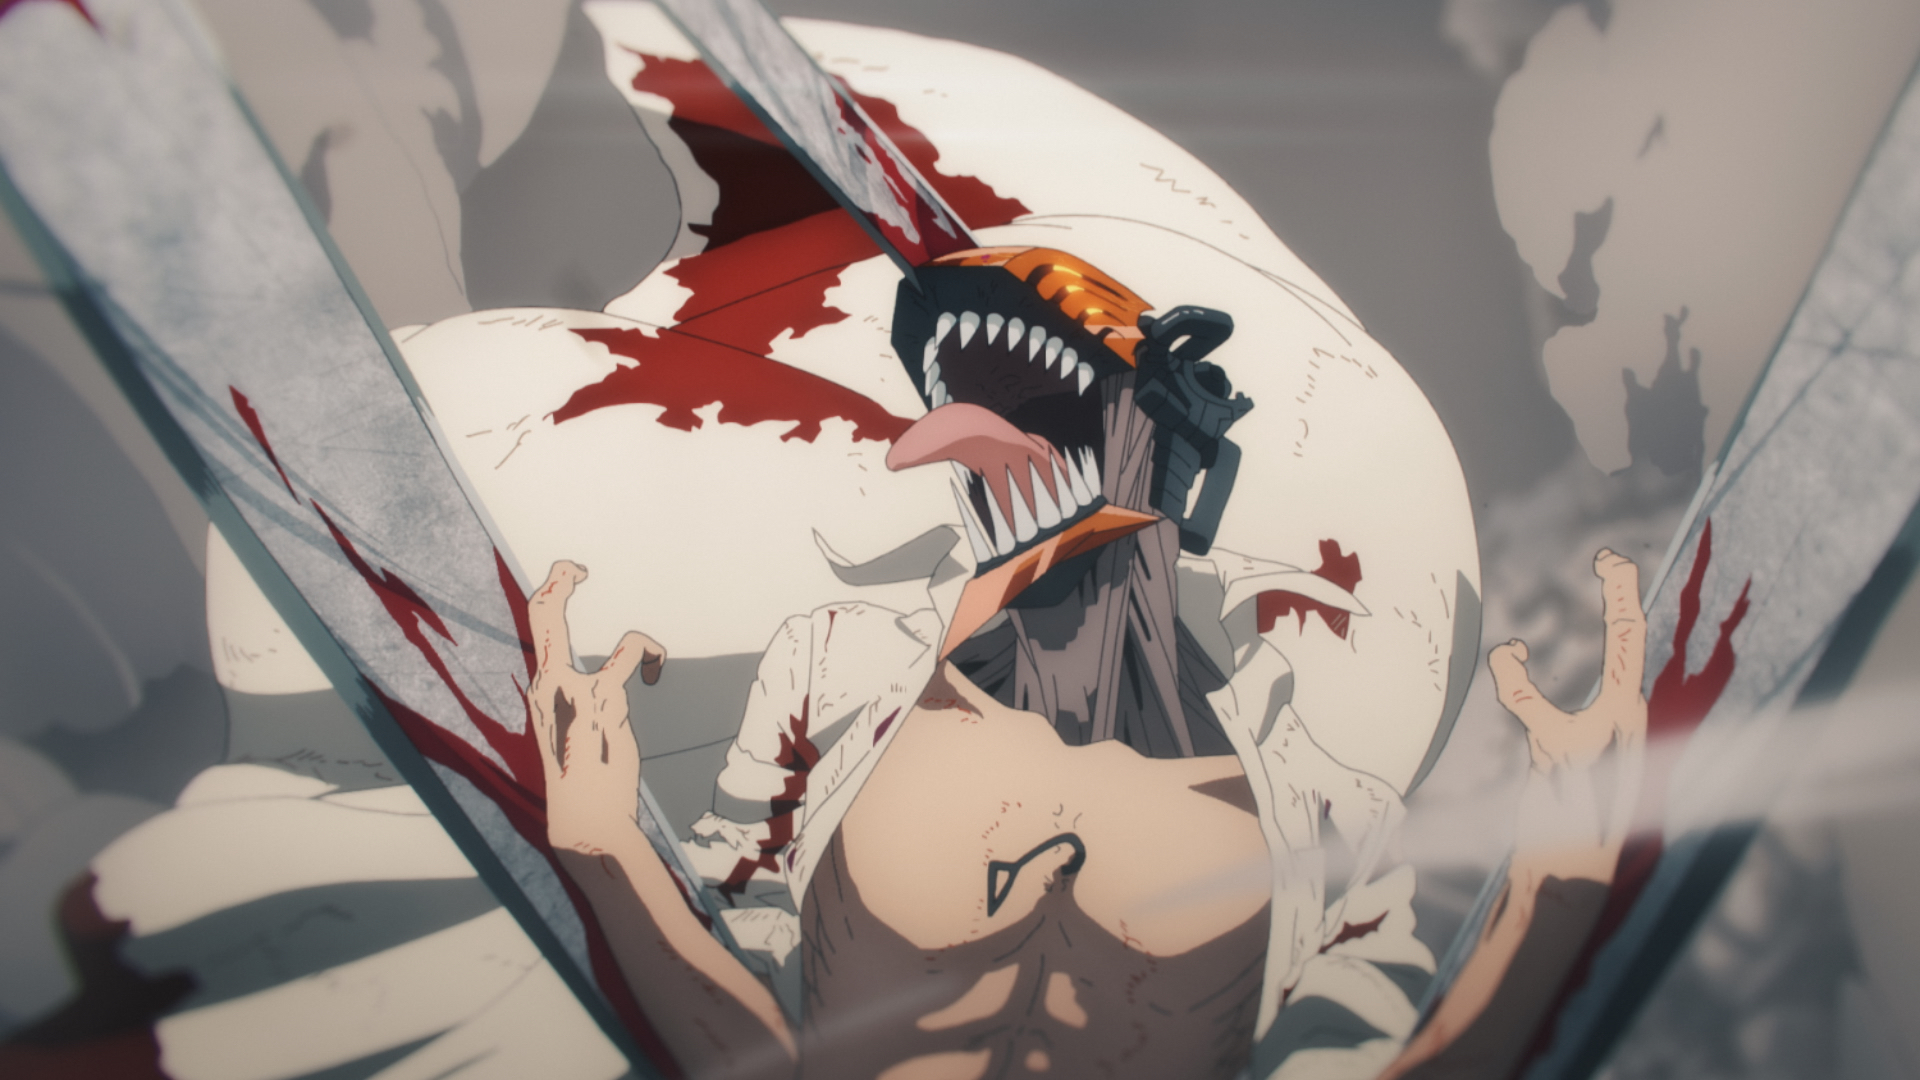 Chainsaw Man Anime Adaptation Goes Heavy on the Blood, Violence and Freaks  of Nature! [Trailer] - Bloody Disgusting